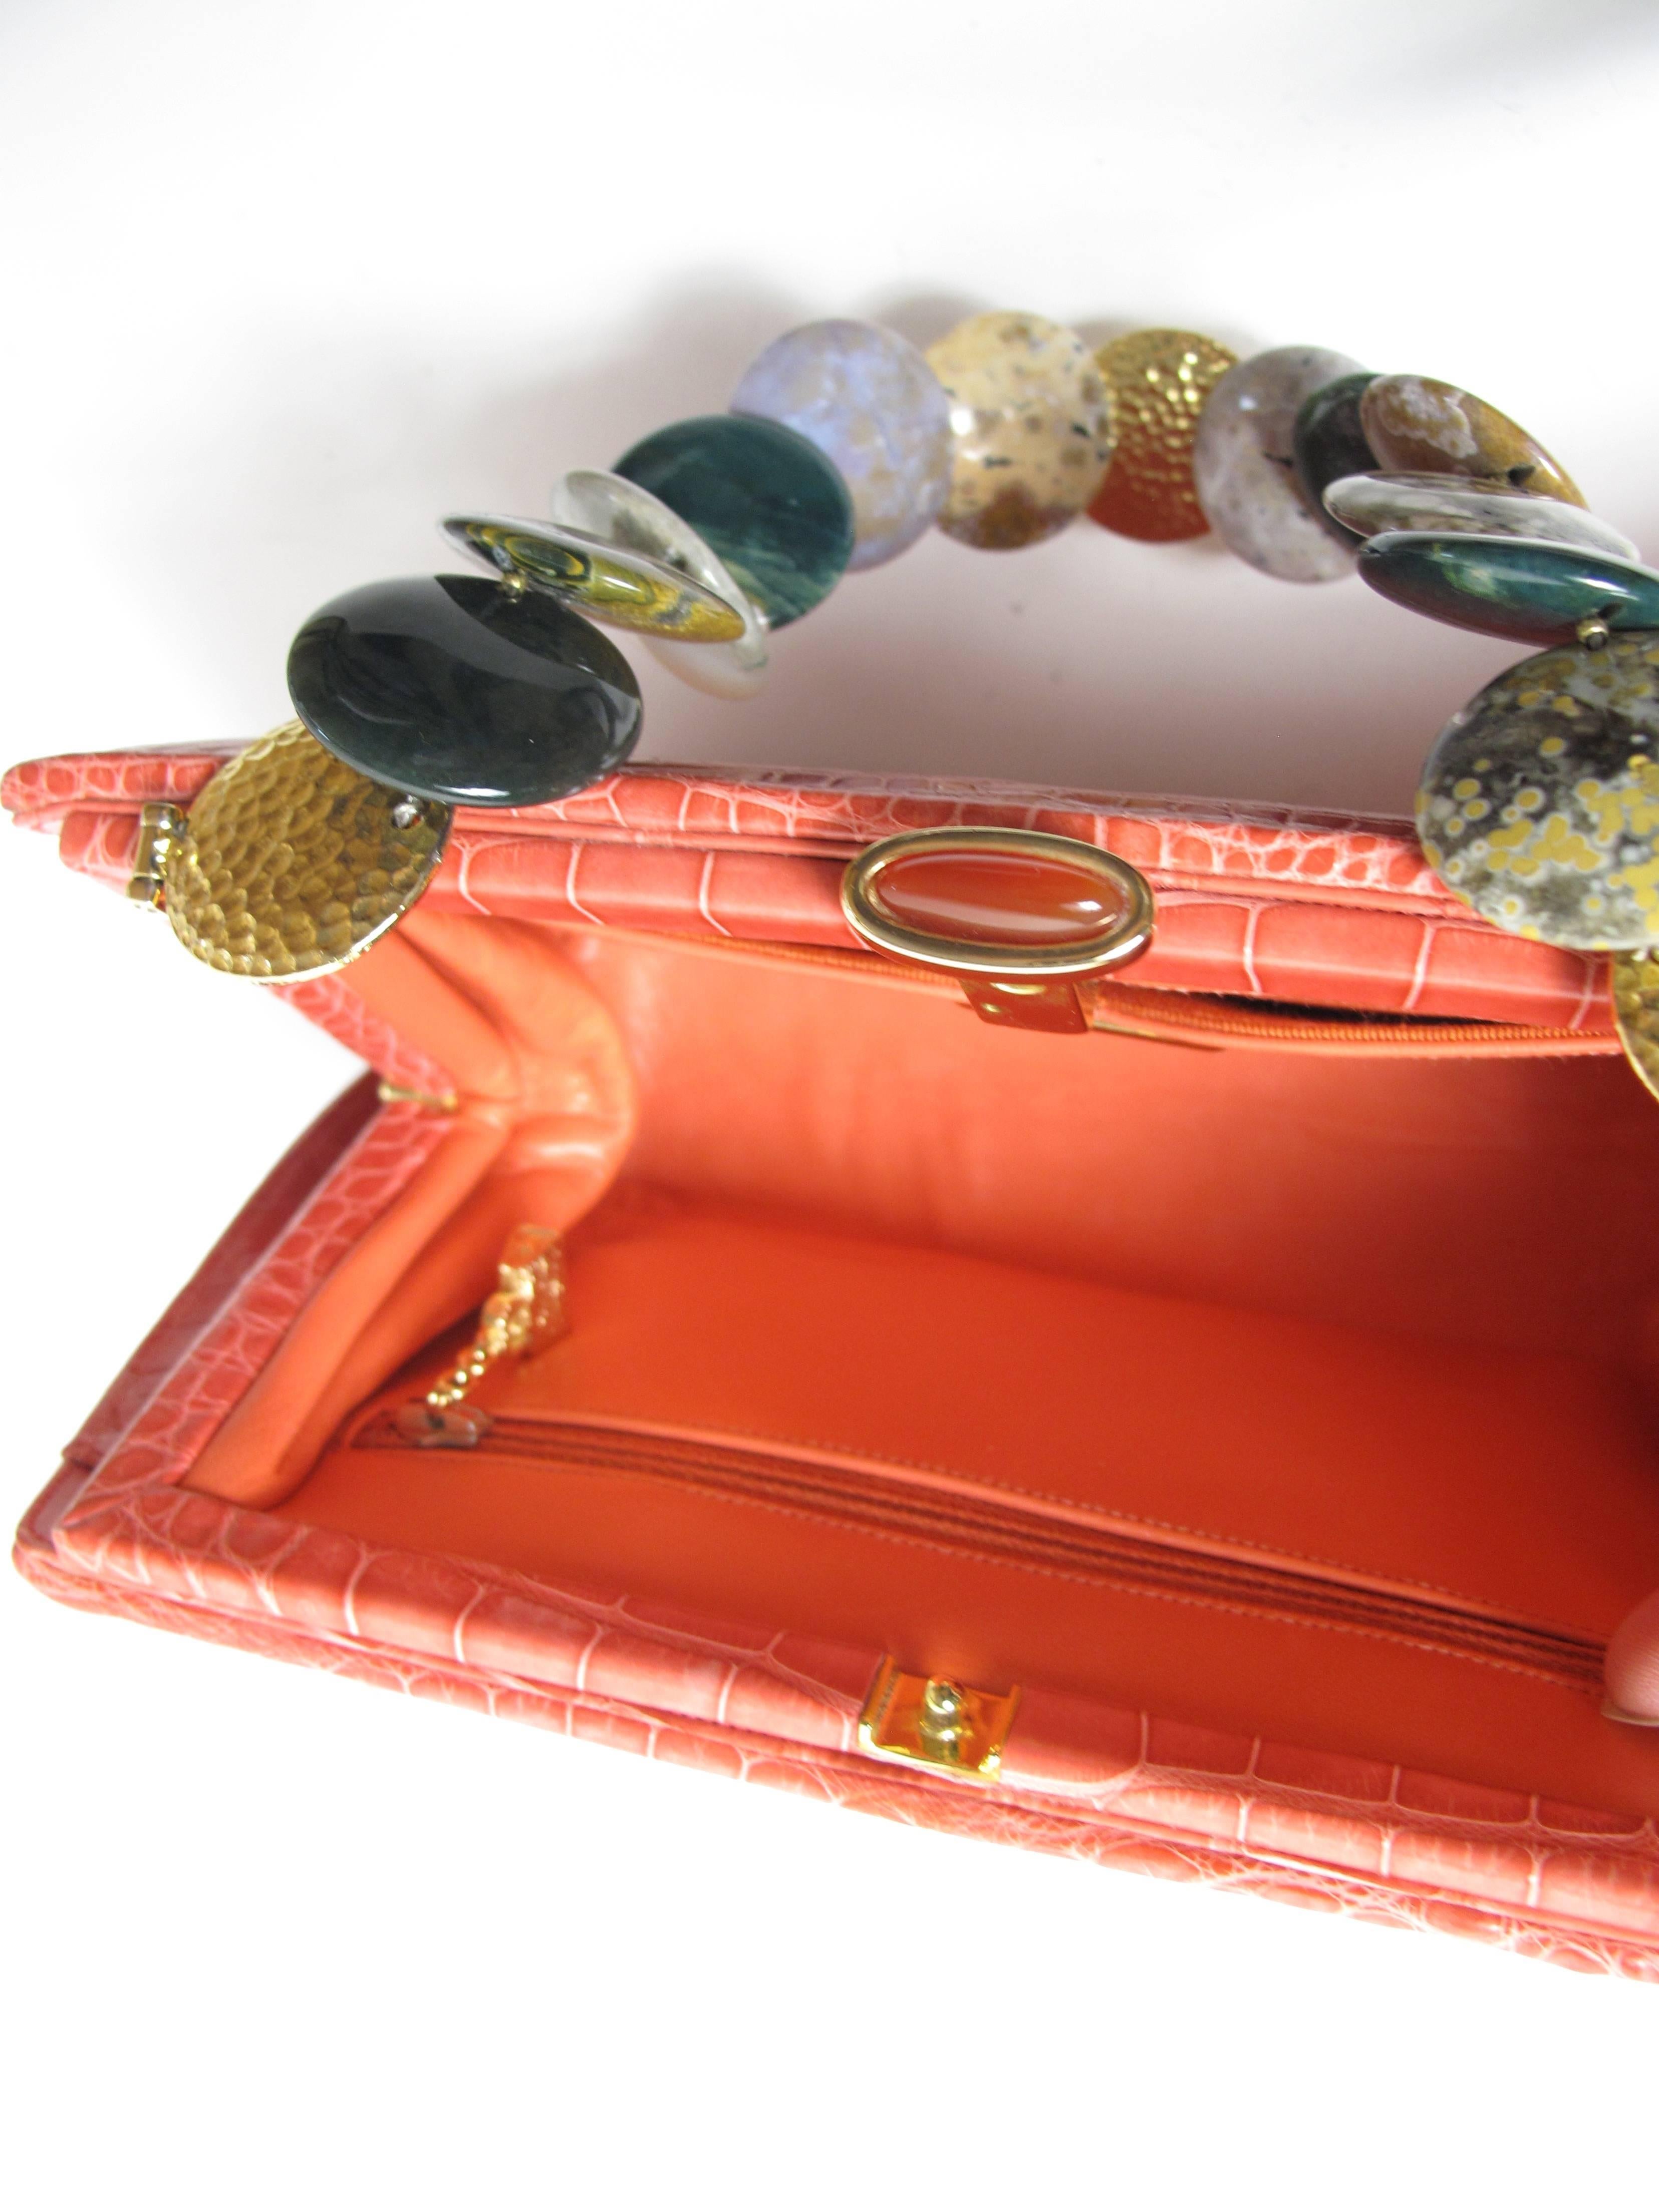 Judith Leiber Alligator Bag with Polished Stone Strap - sale In Excellent Condition In Austin, TX